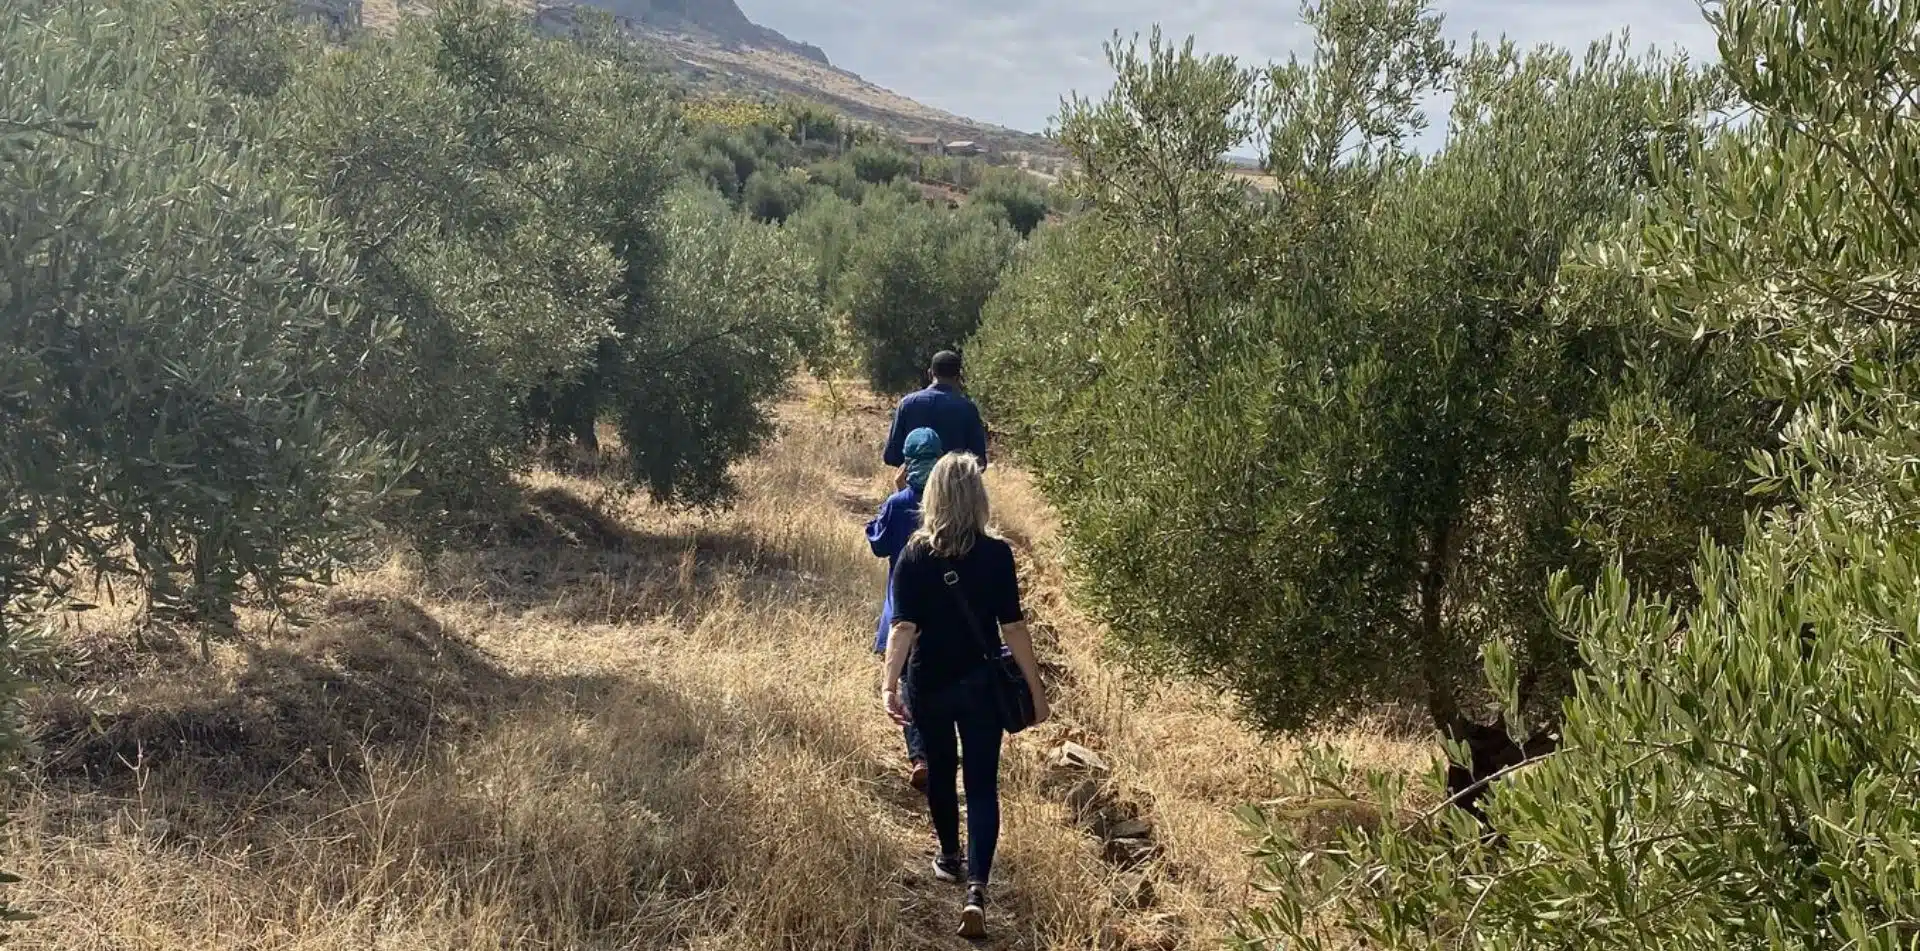 Walking through olive groves in Morocco